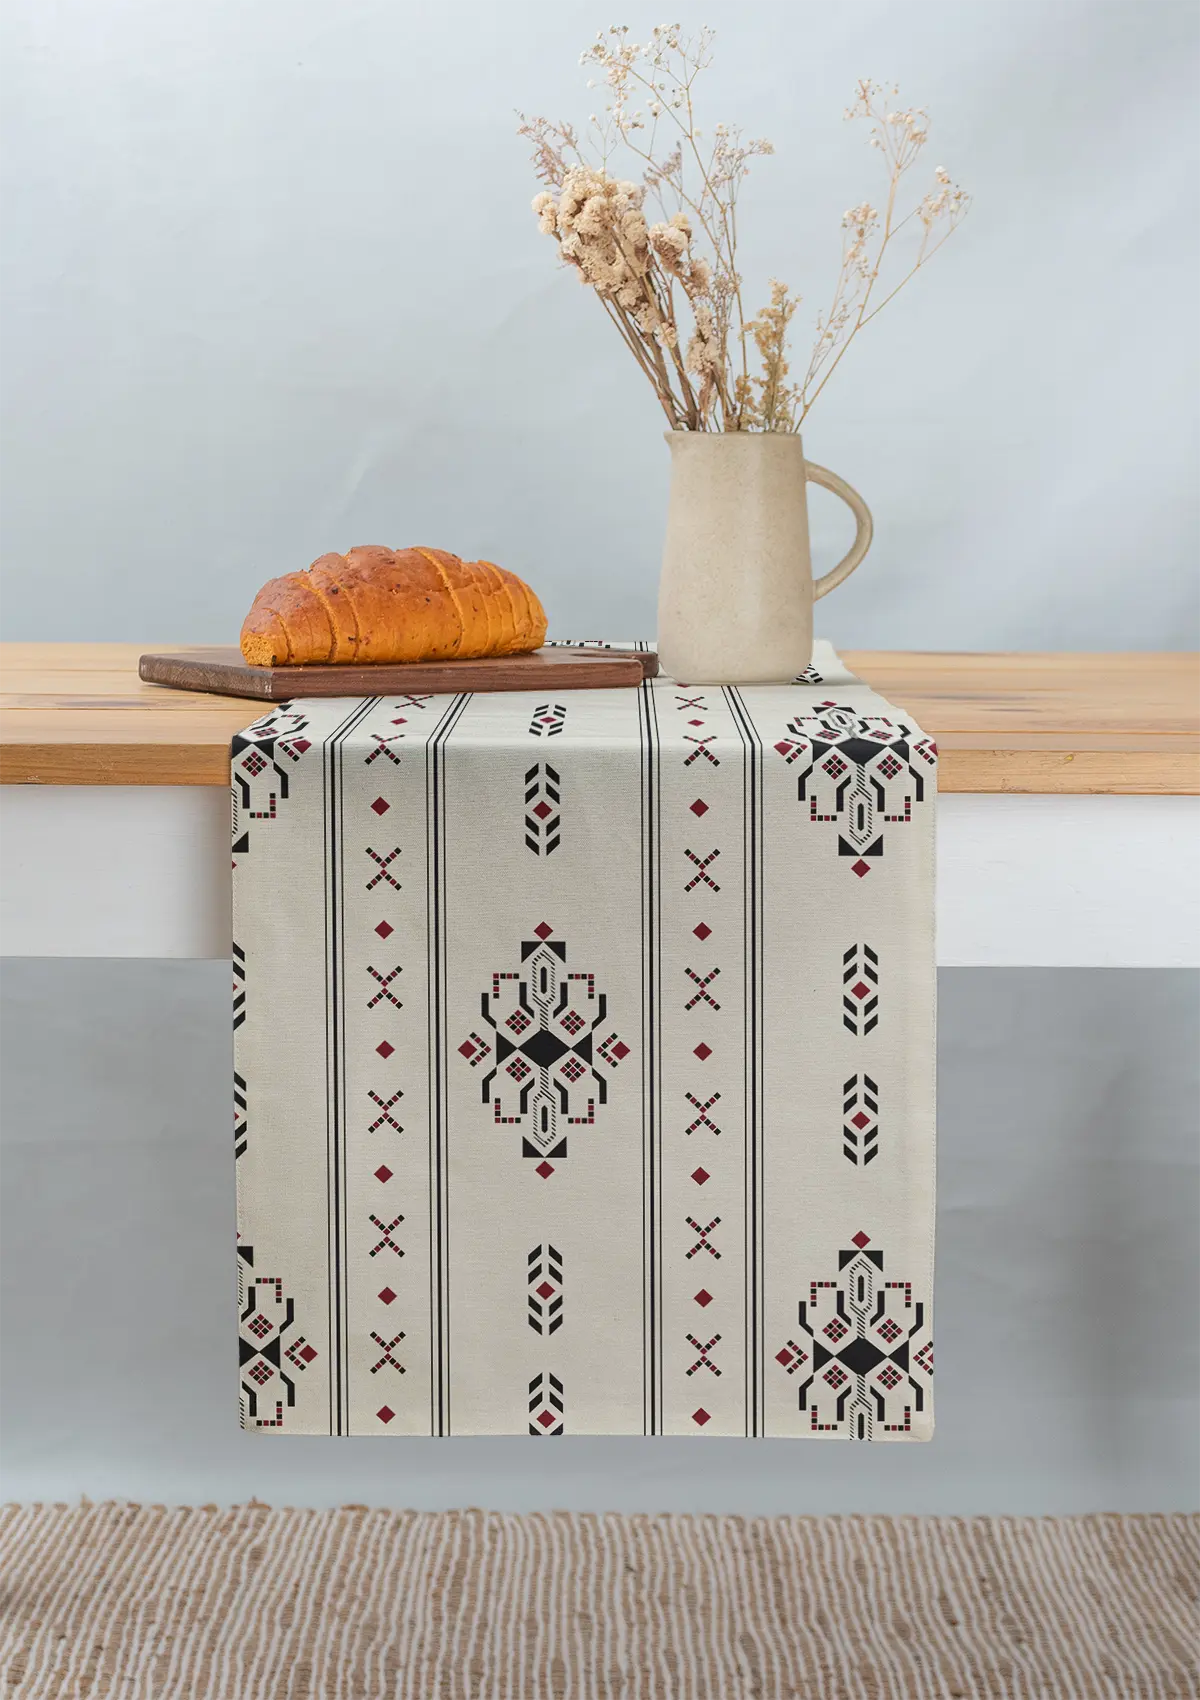 Gypsy 100% cotton geometric table runner for 4 seater or 6 seater dining - Black